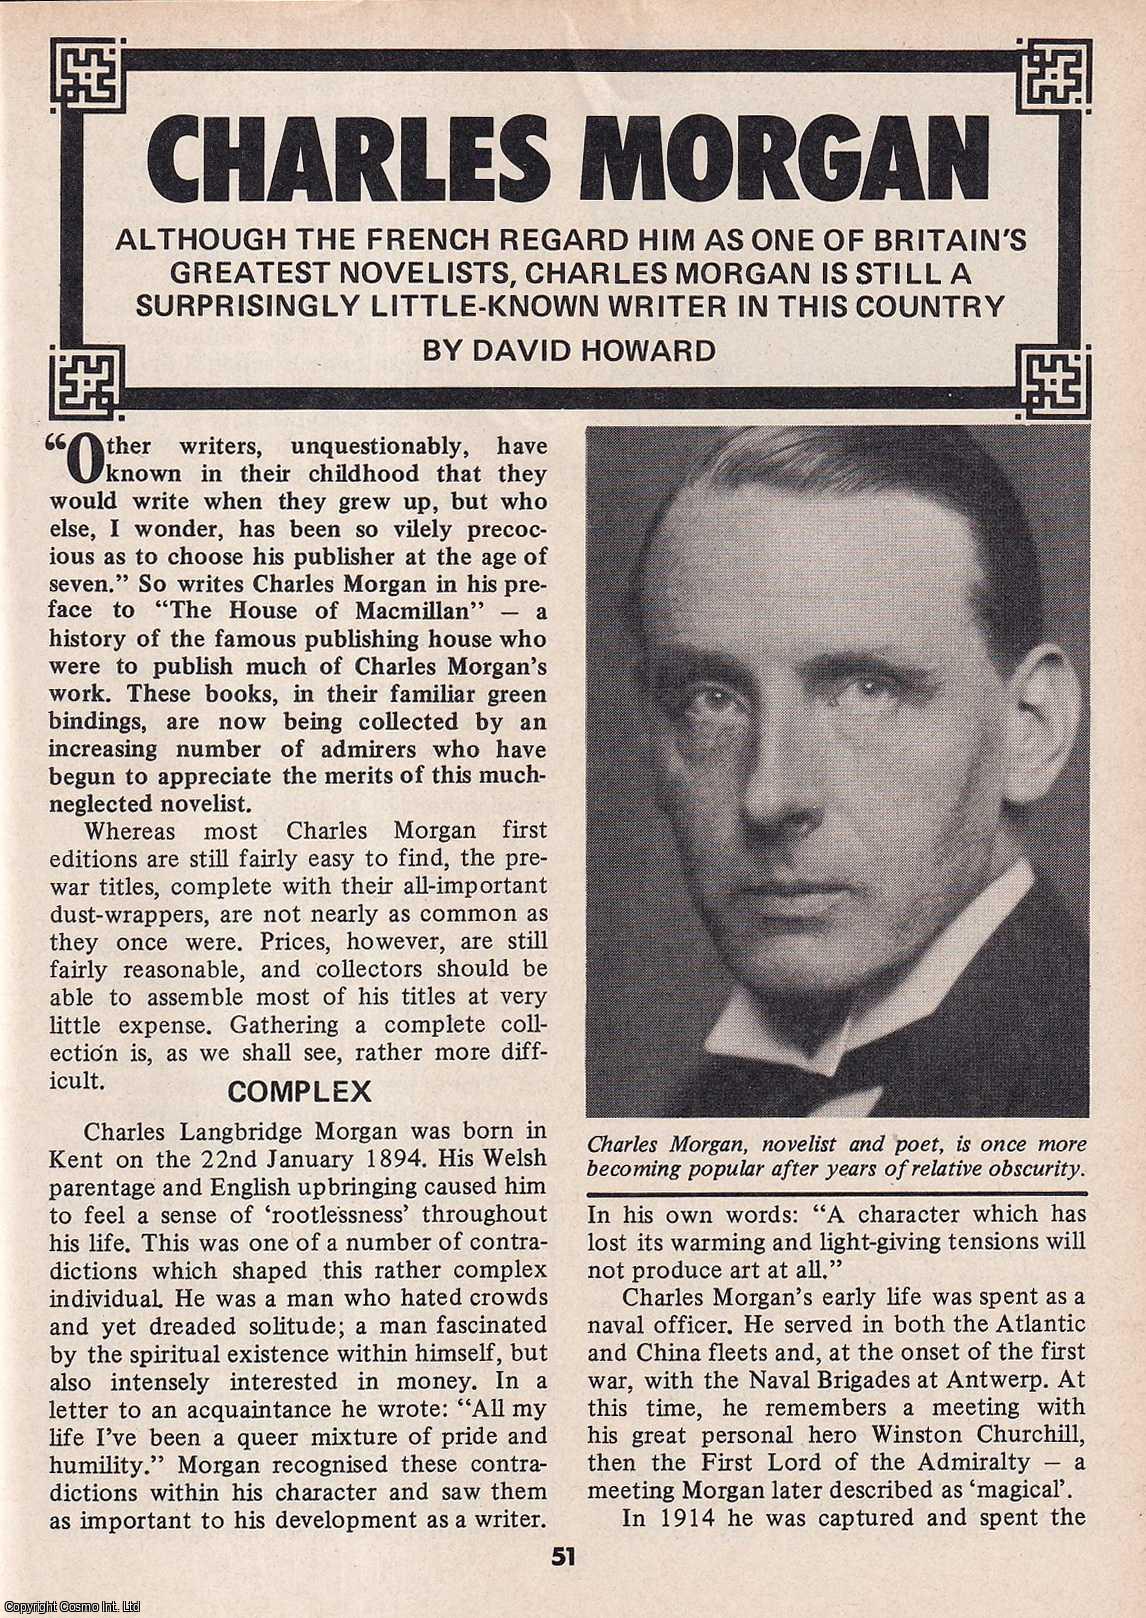 David Howard - Charles Morgan : British playwright and novelist. This is an original article separated from an issue of The Book & Magazine Collector publication, 1988.